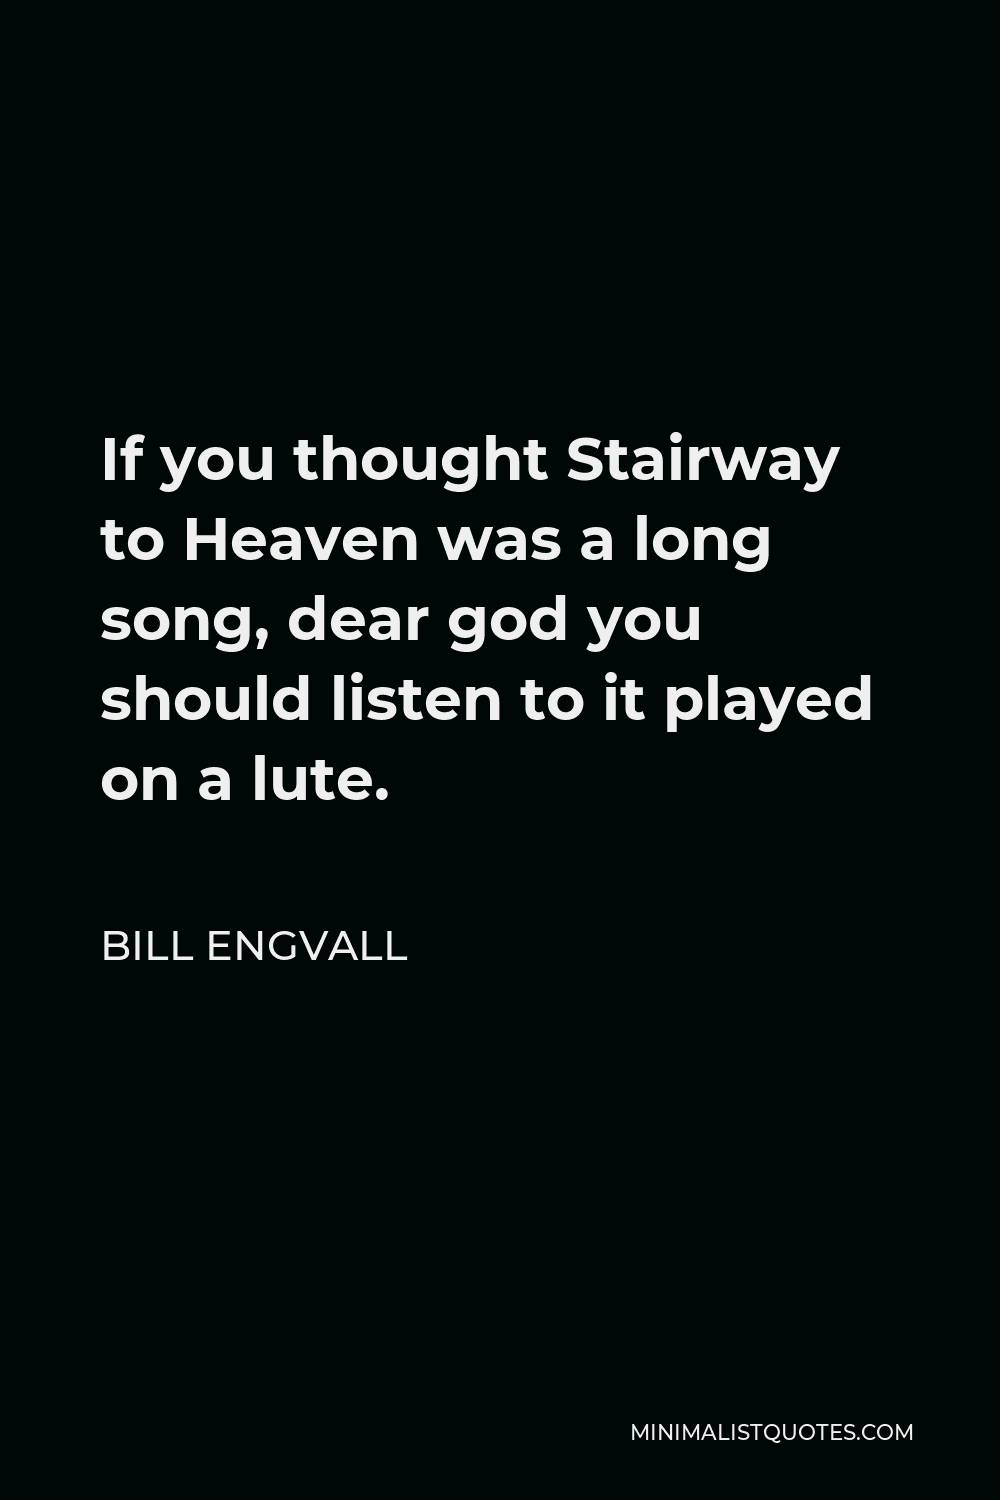 Bill Engvall Quote - If you thought Stairway to Heaven was a long song, dear god you should listen to it played on a lute.